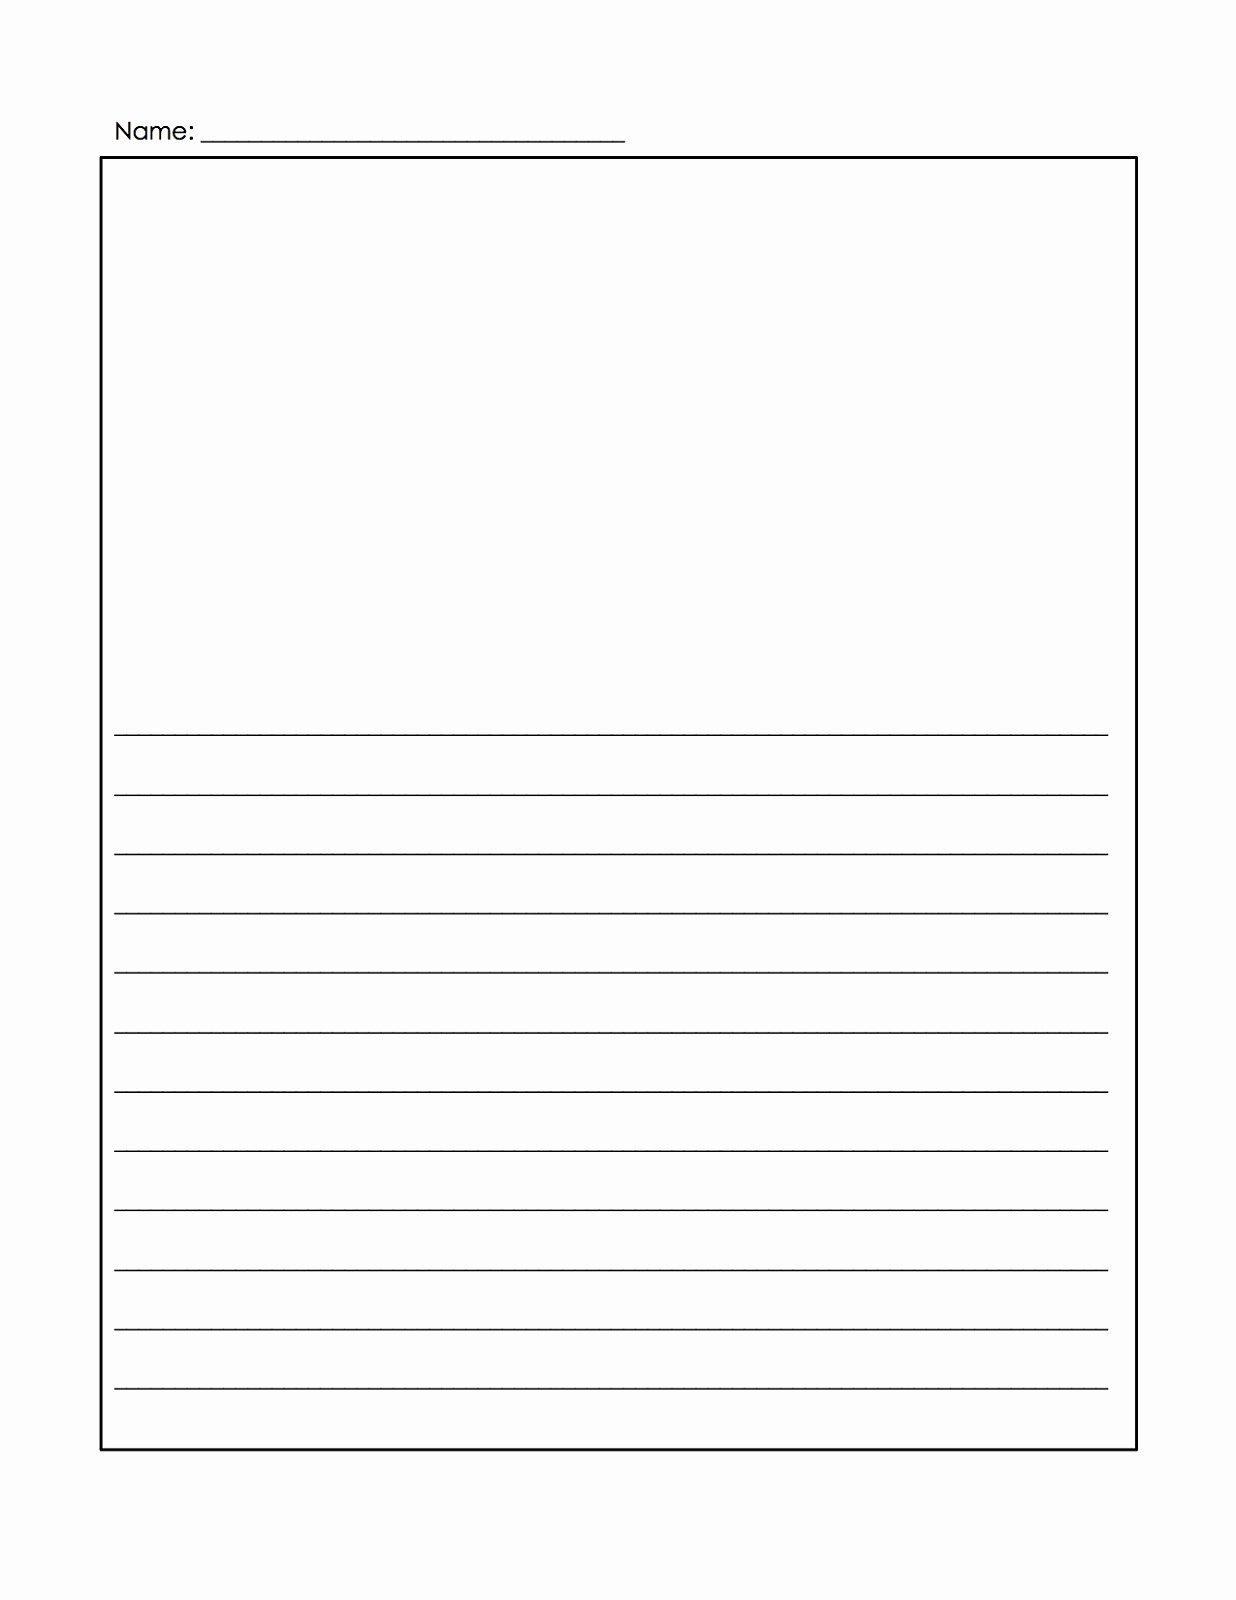 Free Lined Writing Paper Lovely Lined Paper You Can Print In High Quality